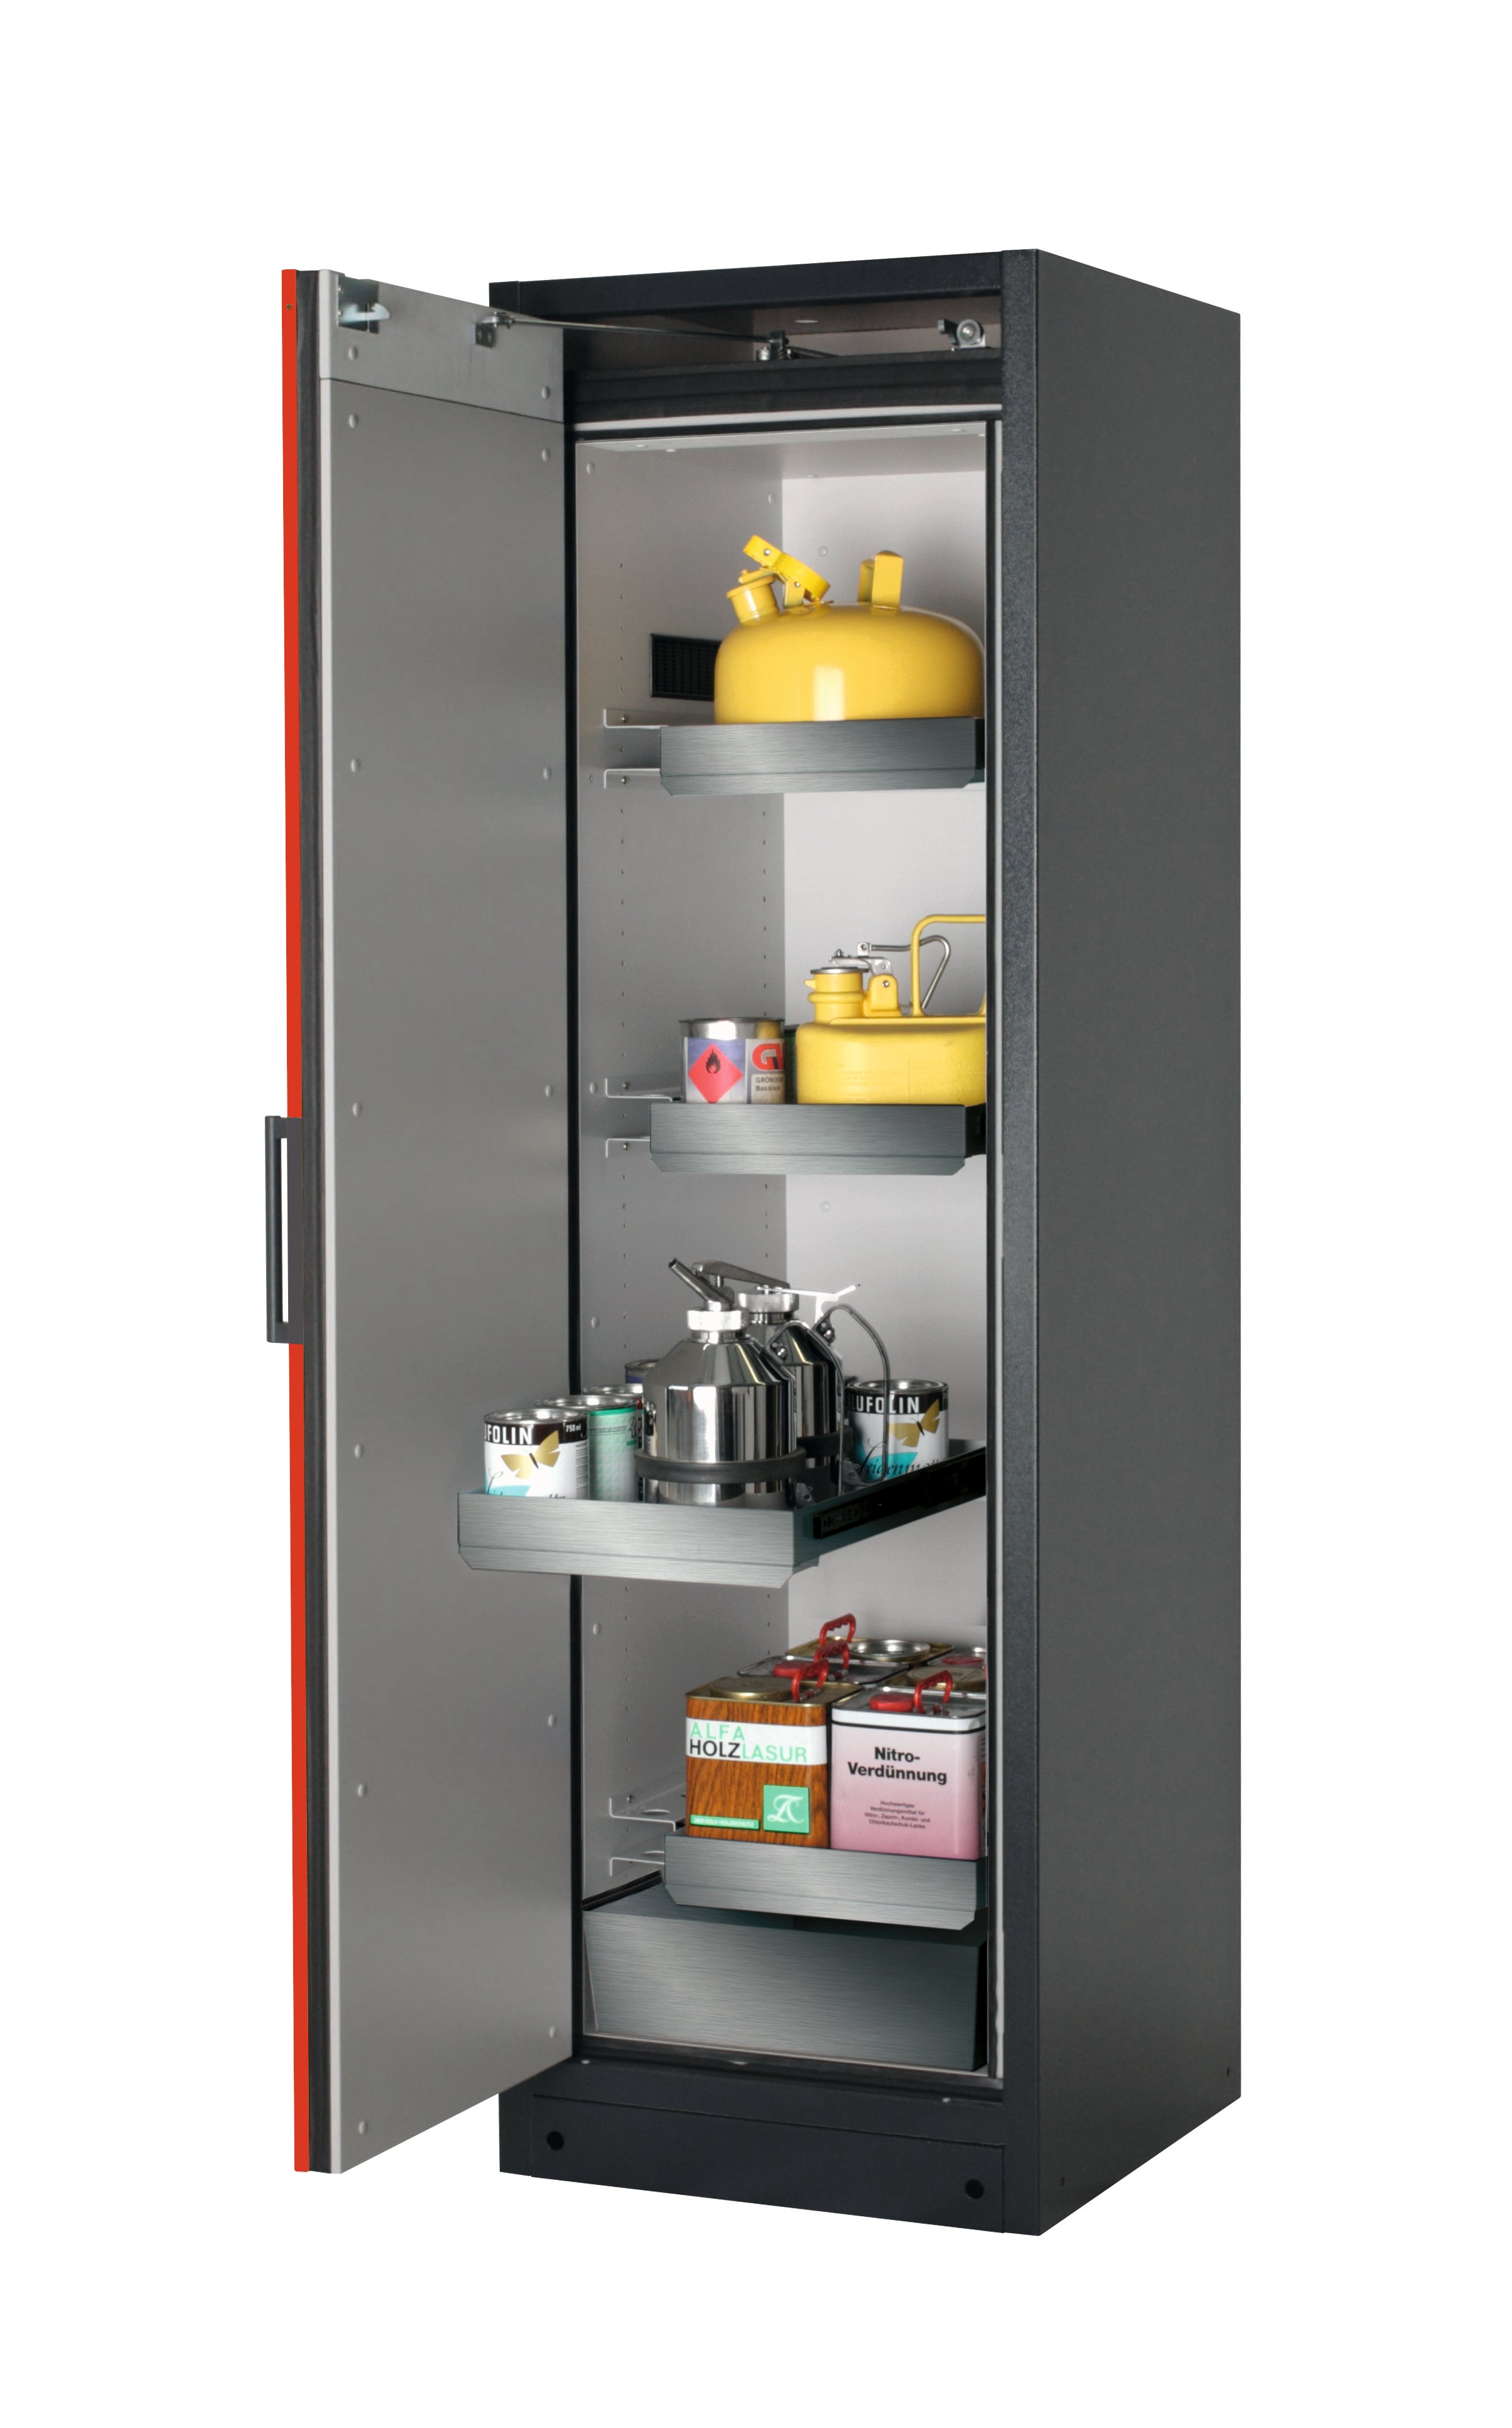 Type 90 safety storage cabinet Q-CLASSIC-90 model Q90.195.060 in traffic red RAL 3020 with 3x drawer (standard) (stainless steel 1.4301),